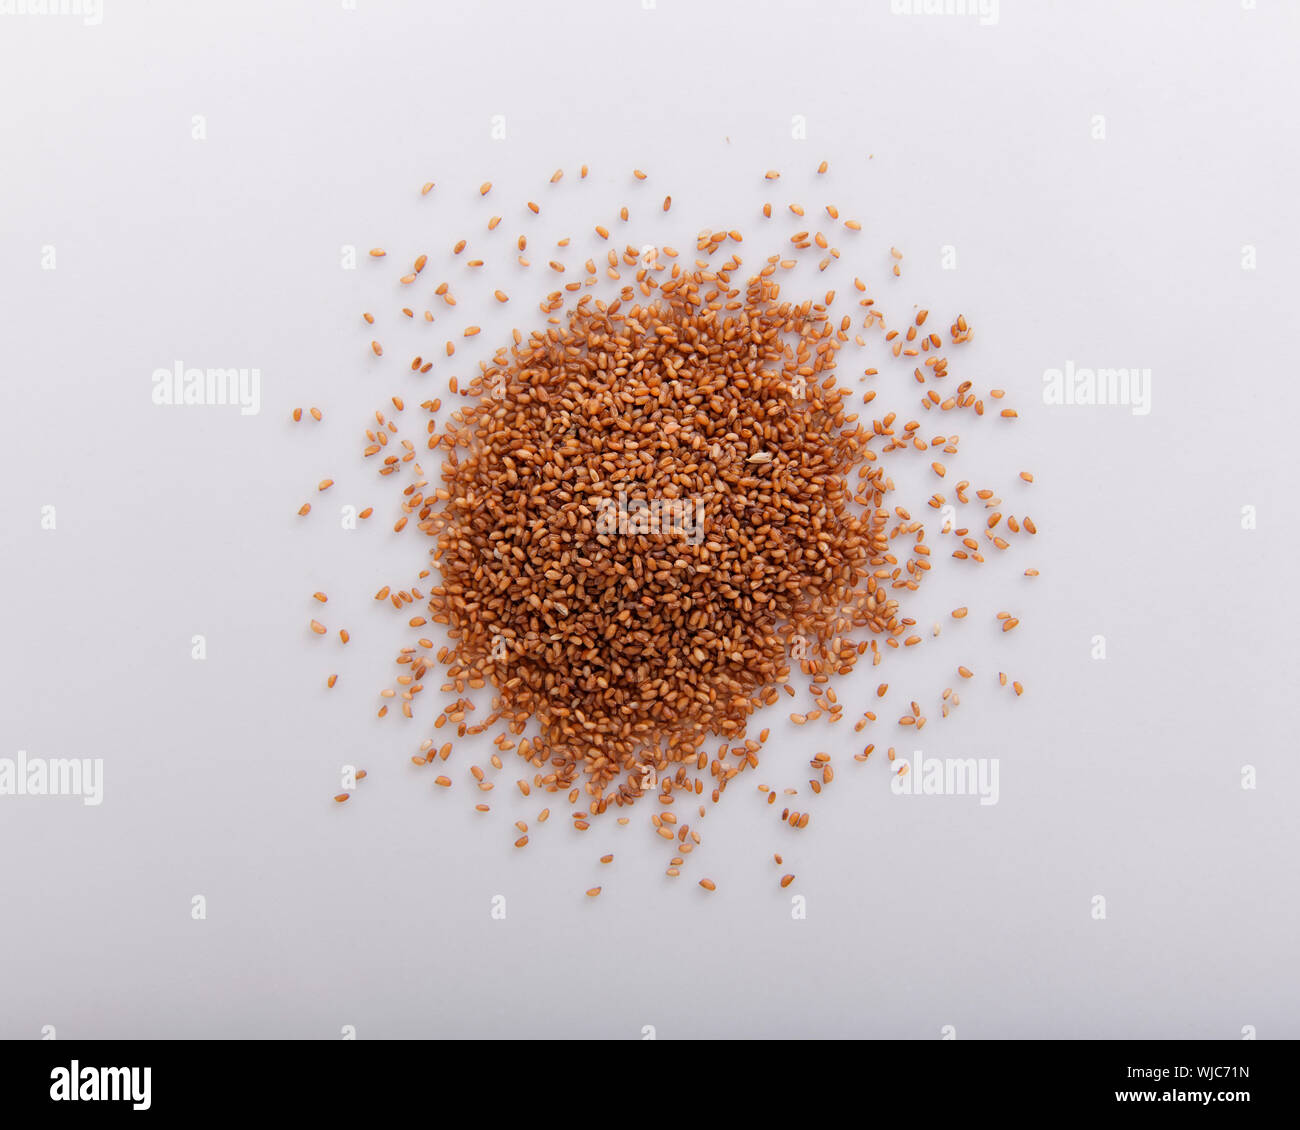 Teff grain piled and seen from above, cloeup Stock Photo